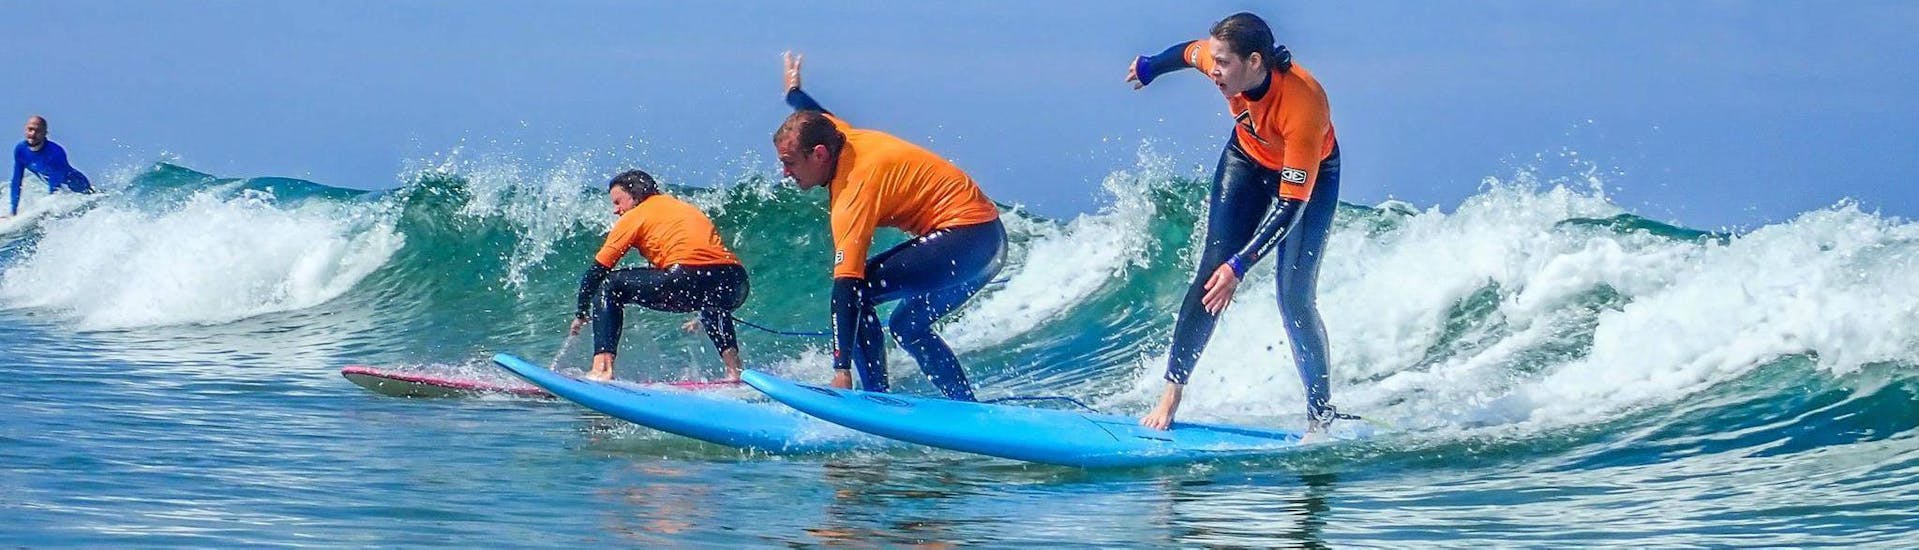 Surf Lessons for Kids & Adults of Beginners & Intermediate.